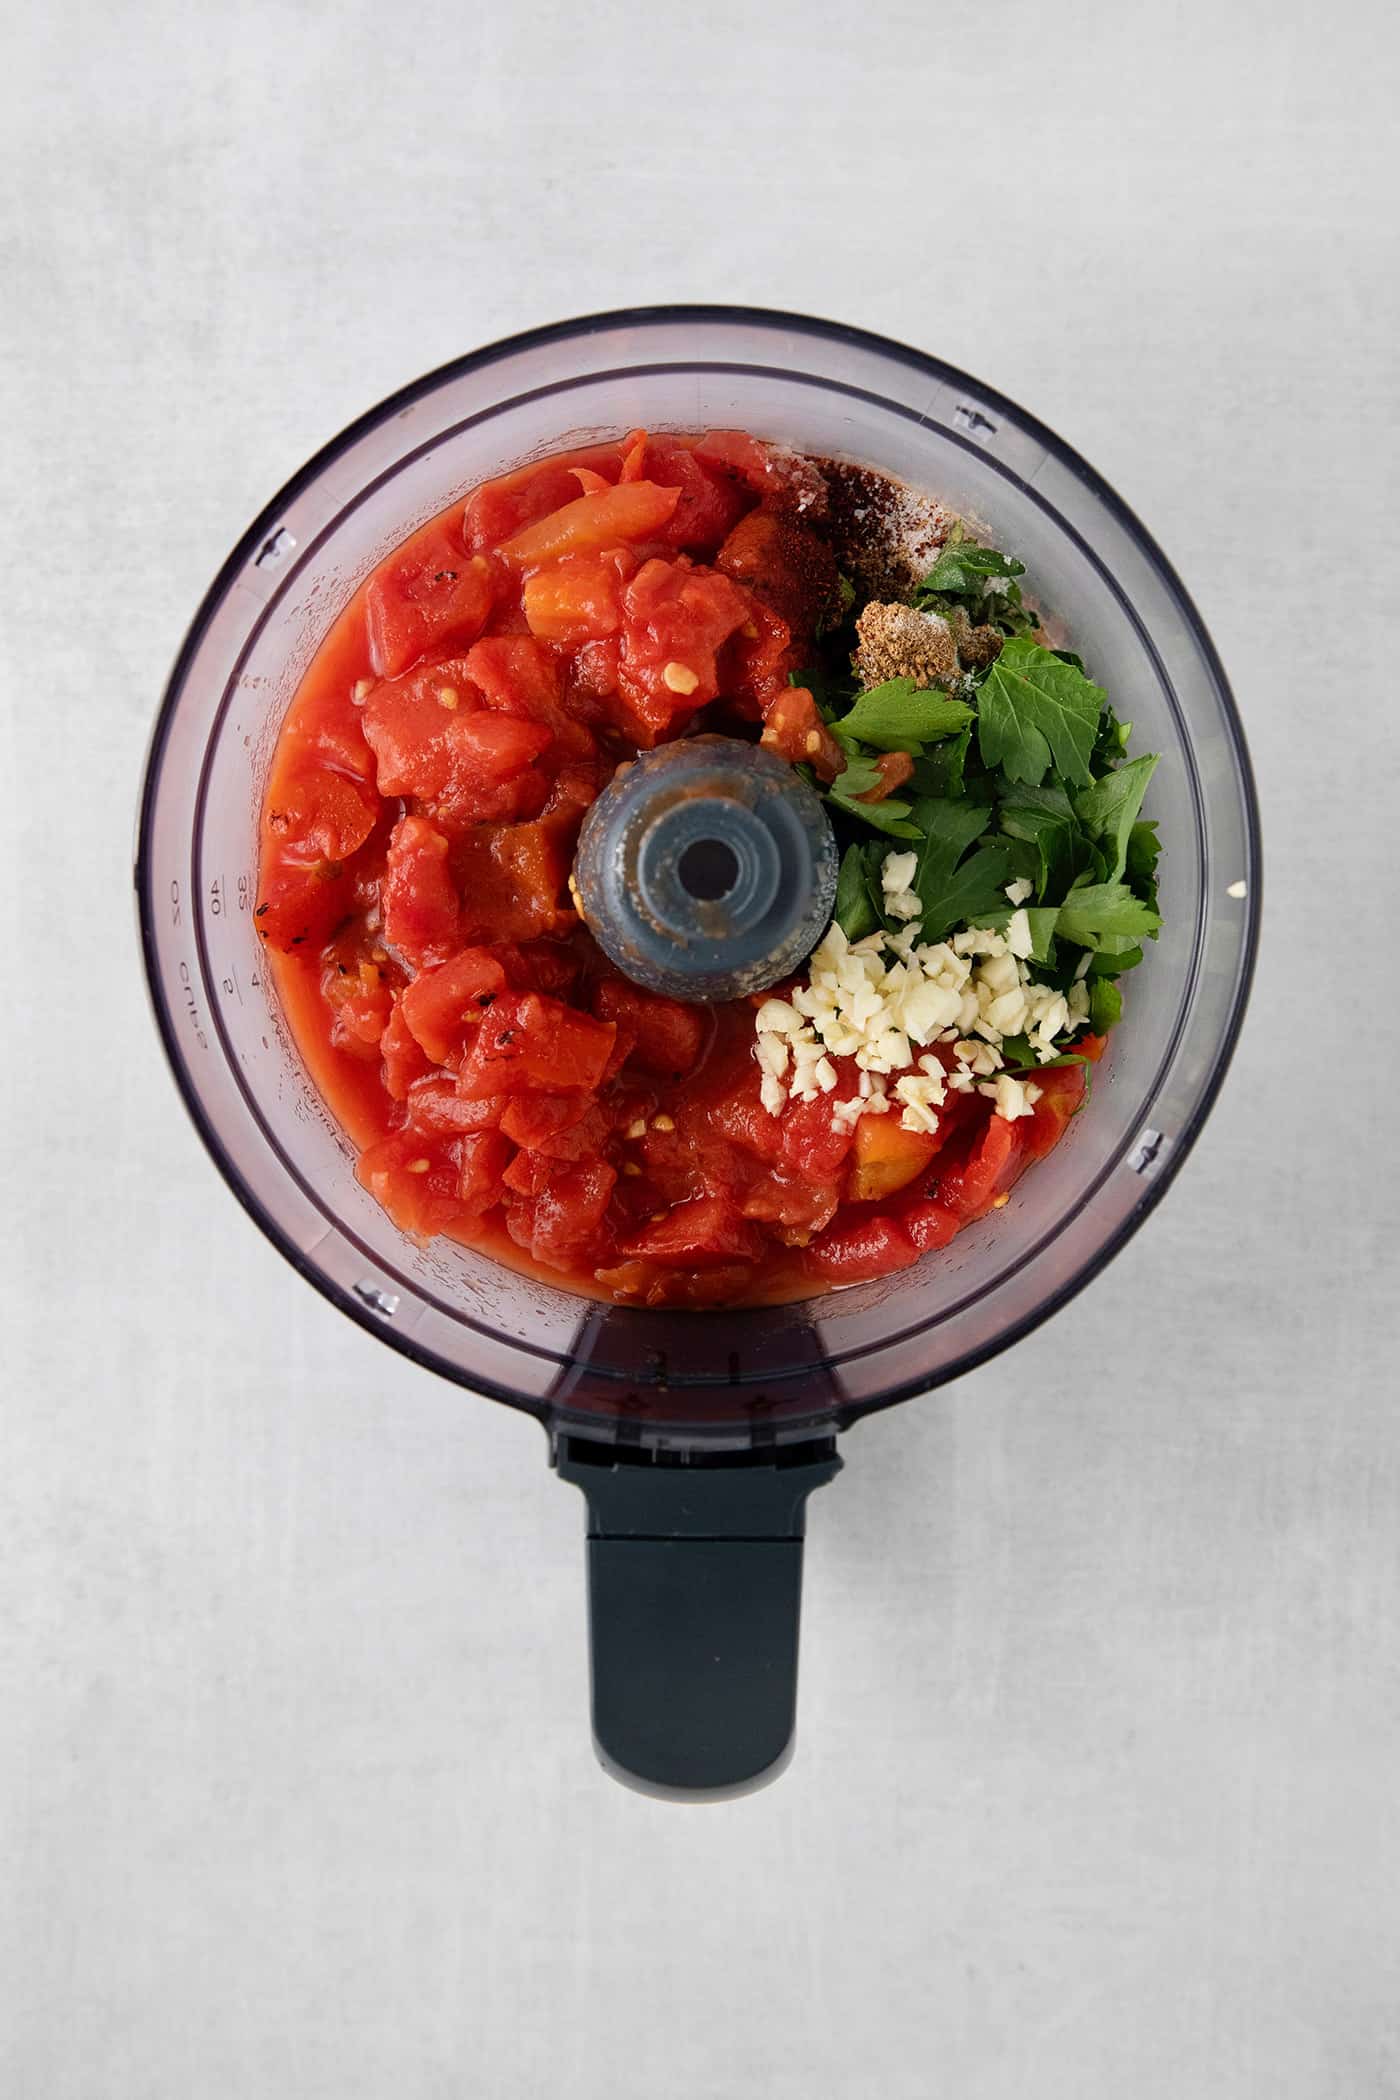 Canned tomatoes, cilantr, jalapeno, garlic, and onion in a food processor